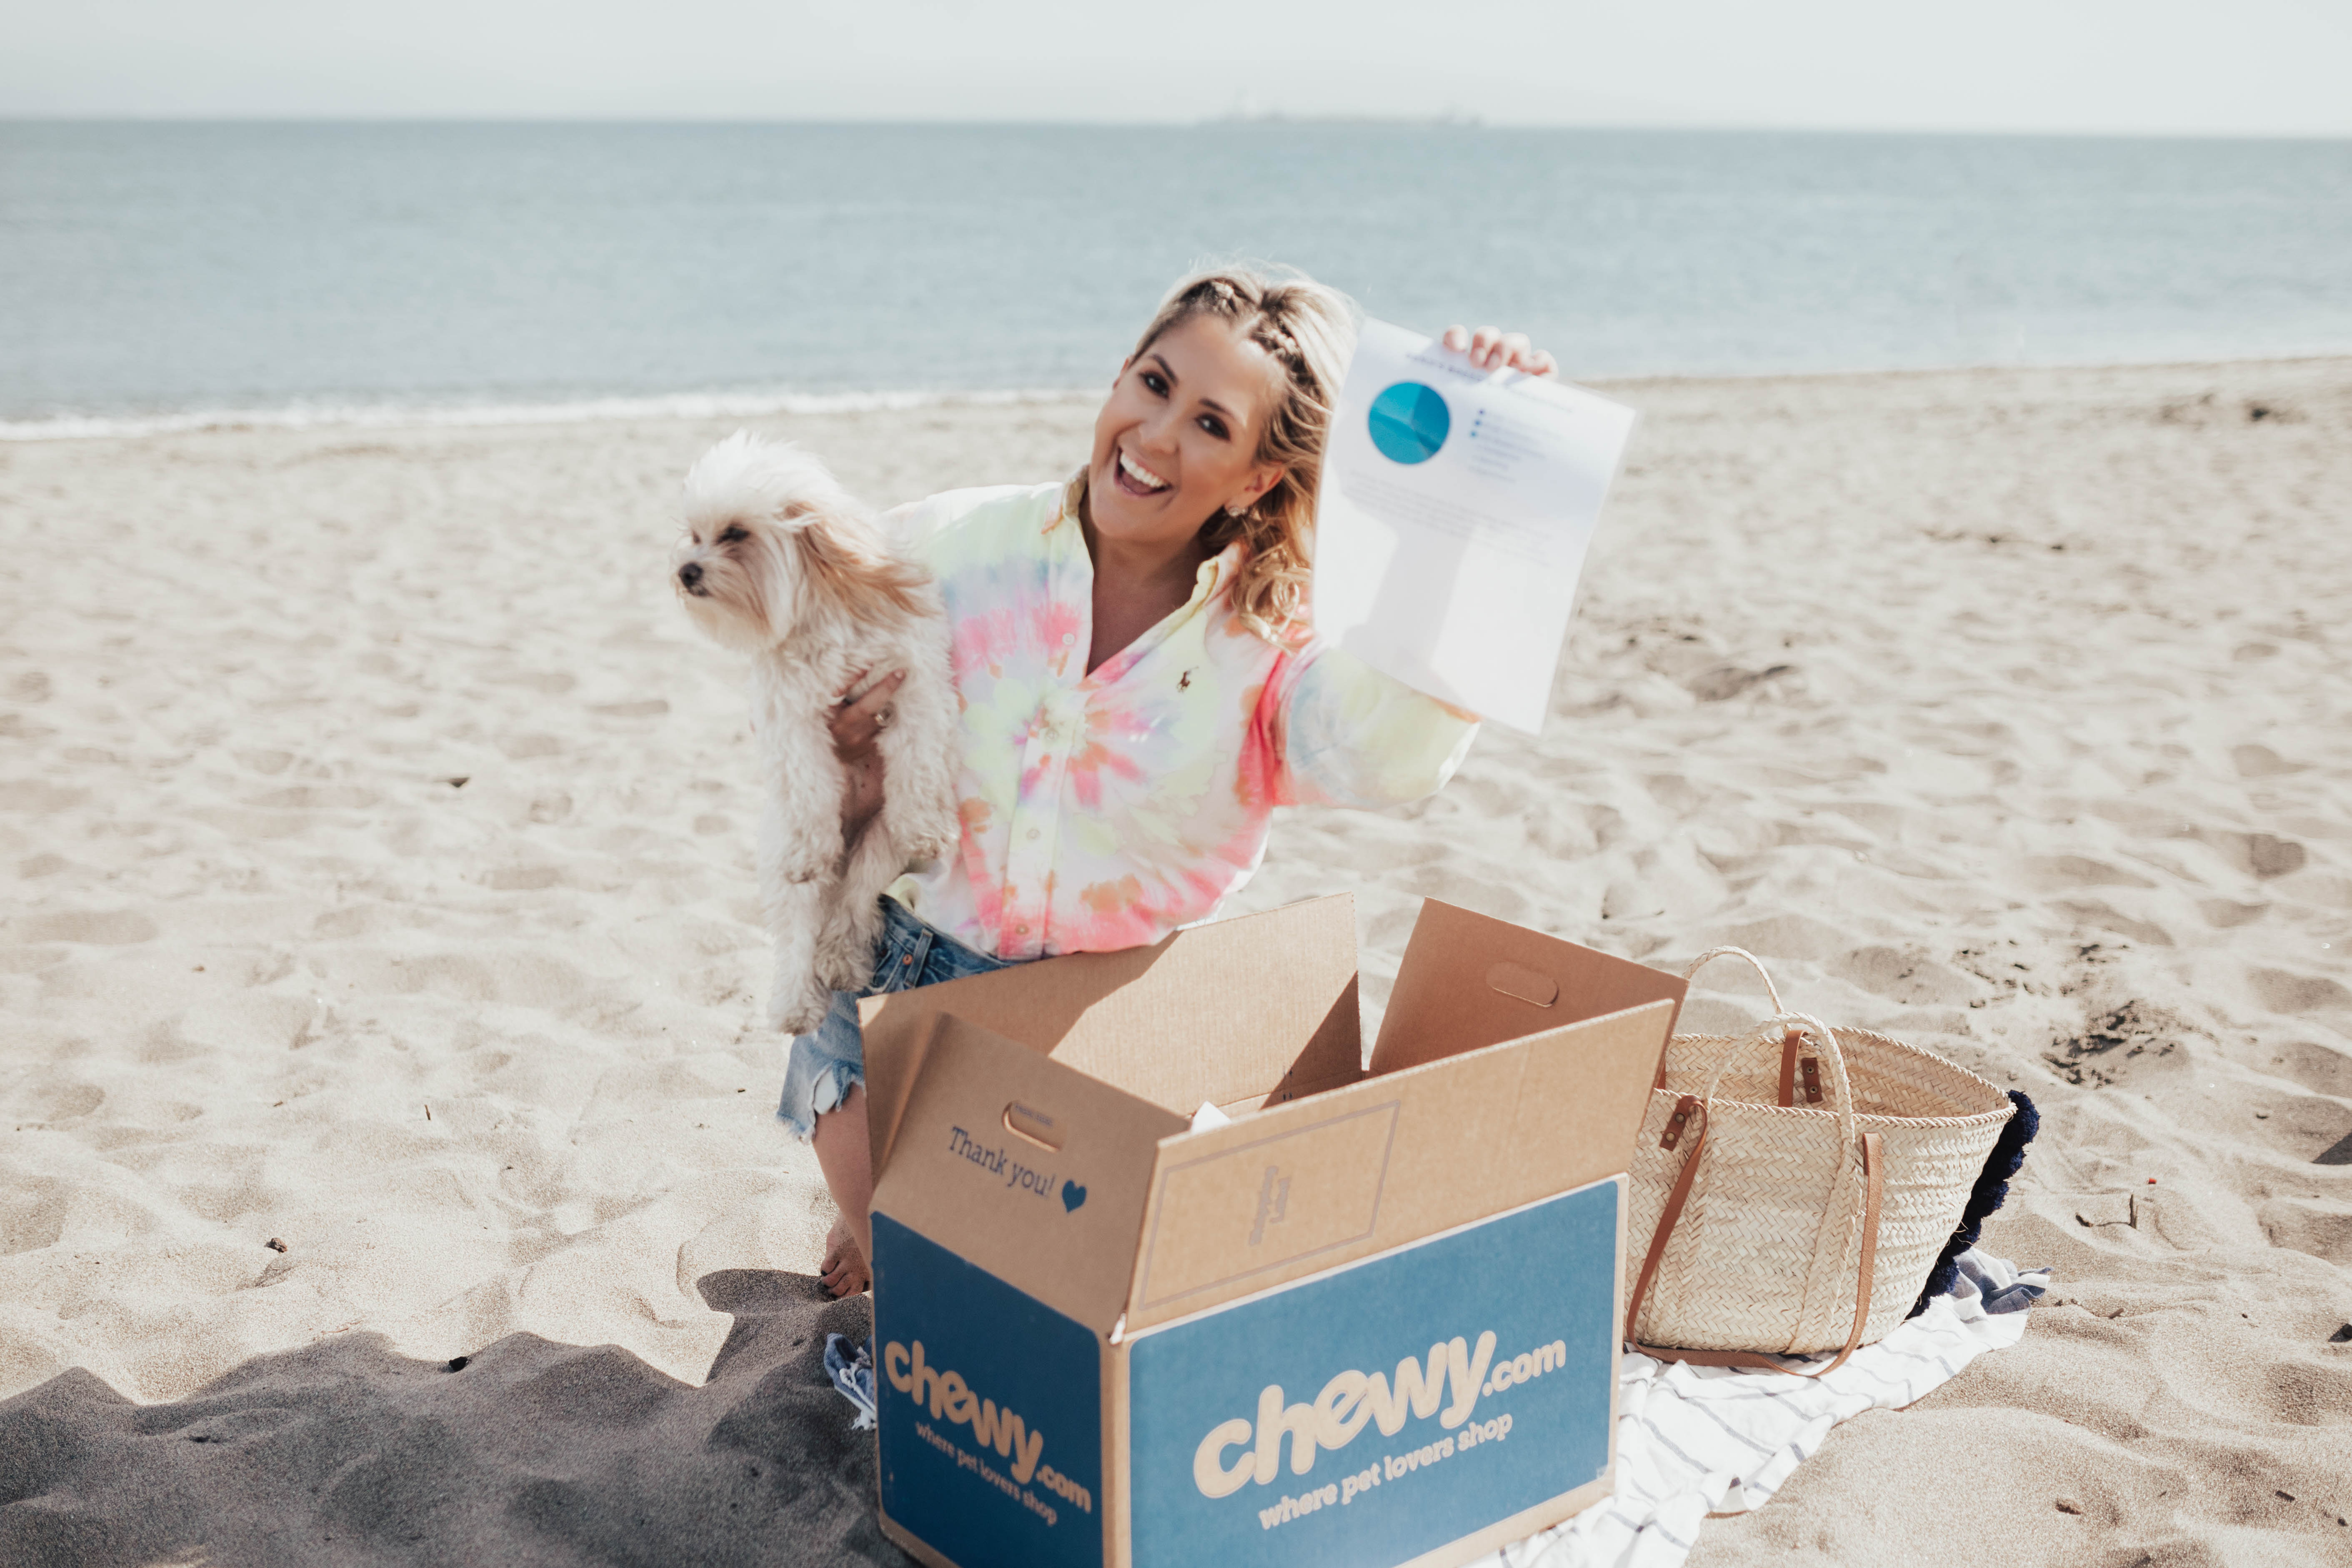 Fashion blogger KatWalkSF shares the results on the beach of his Chewy Wisdom Panel 3.0 Breed Identification Dog DNA Test Kit